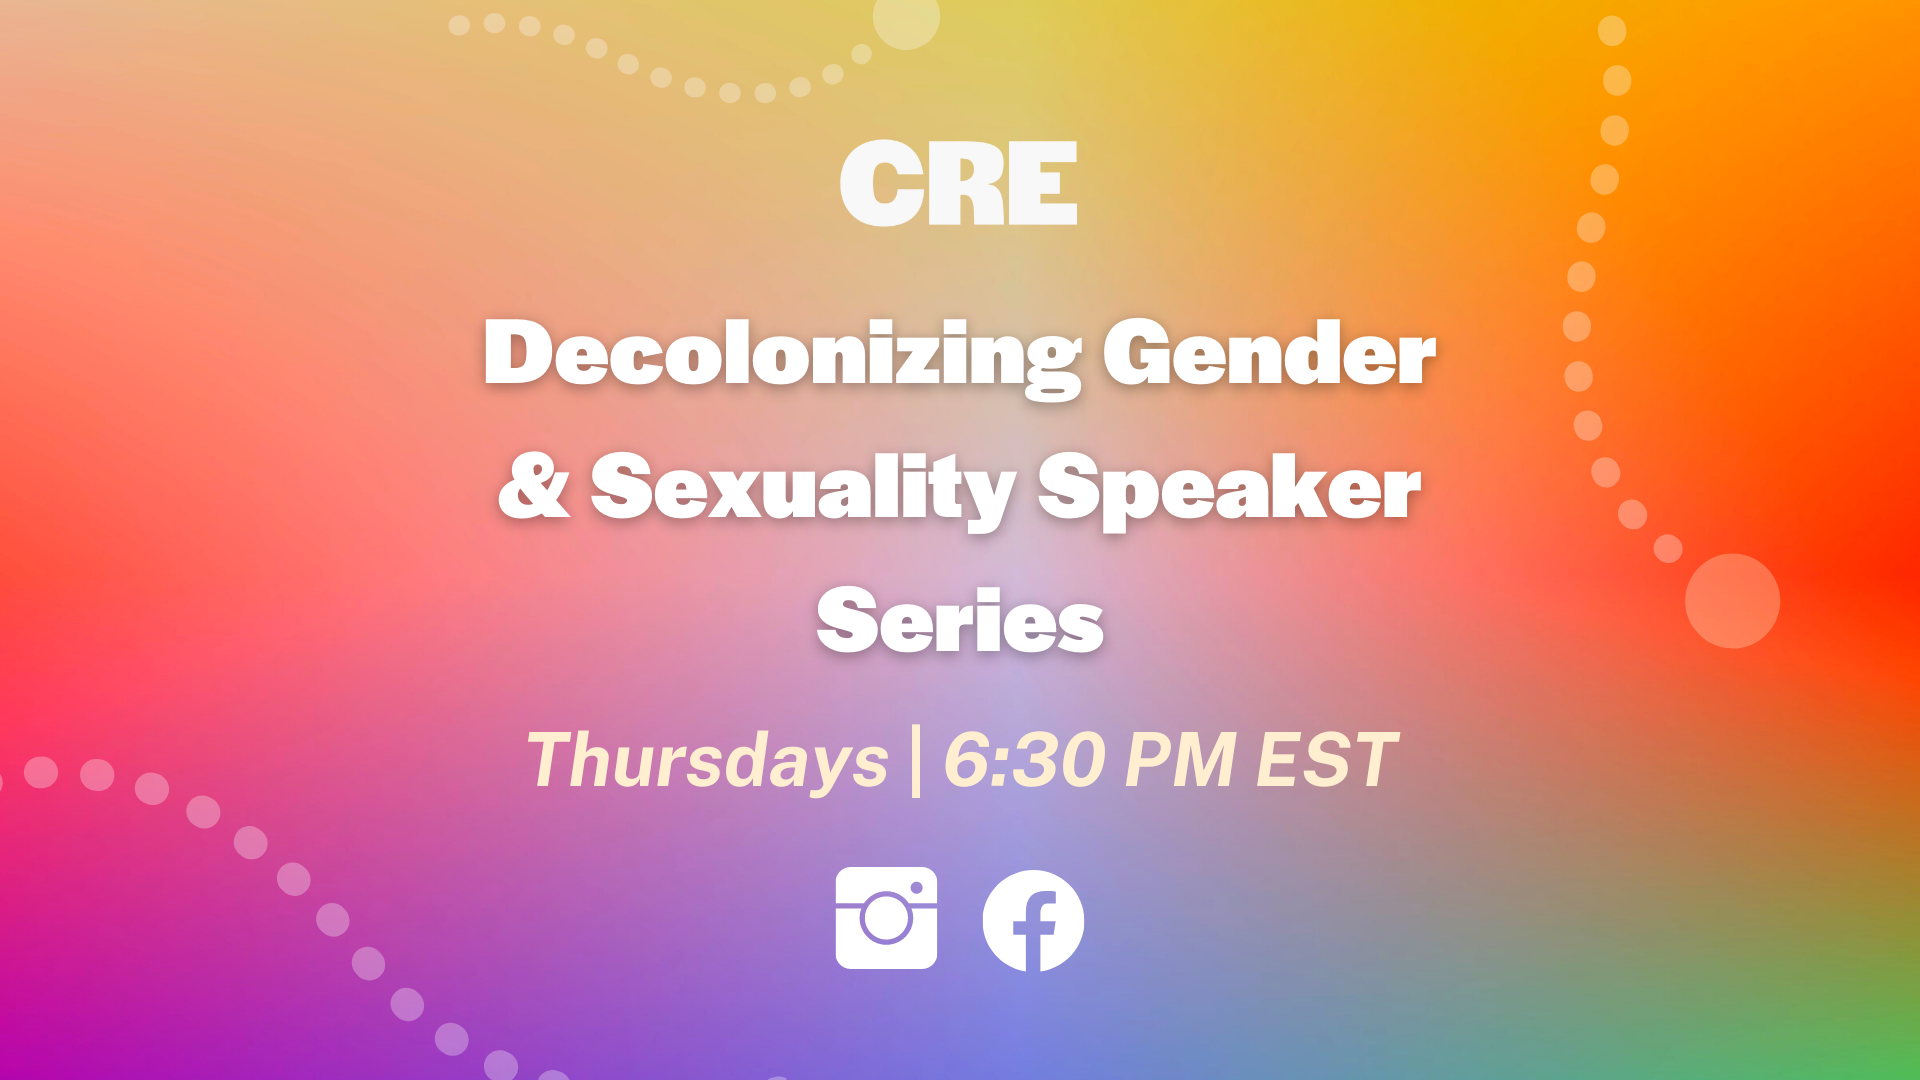 Decolonizing Gender & Sexuality Series